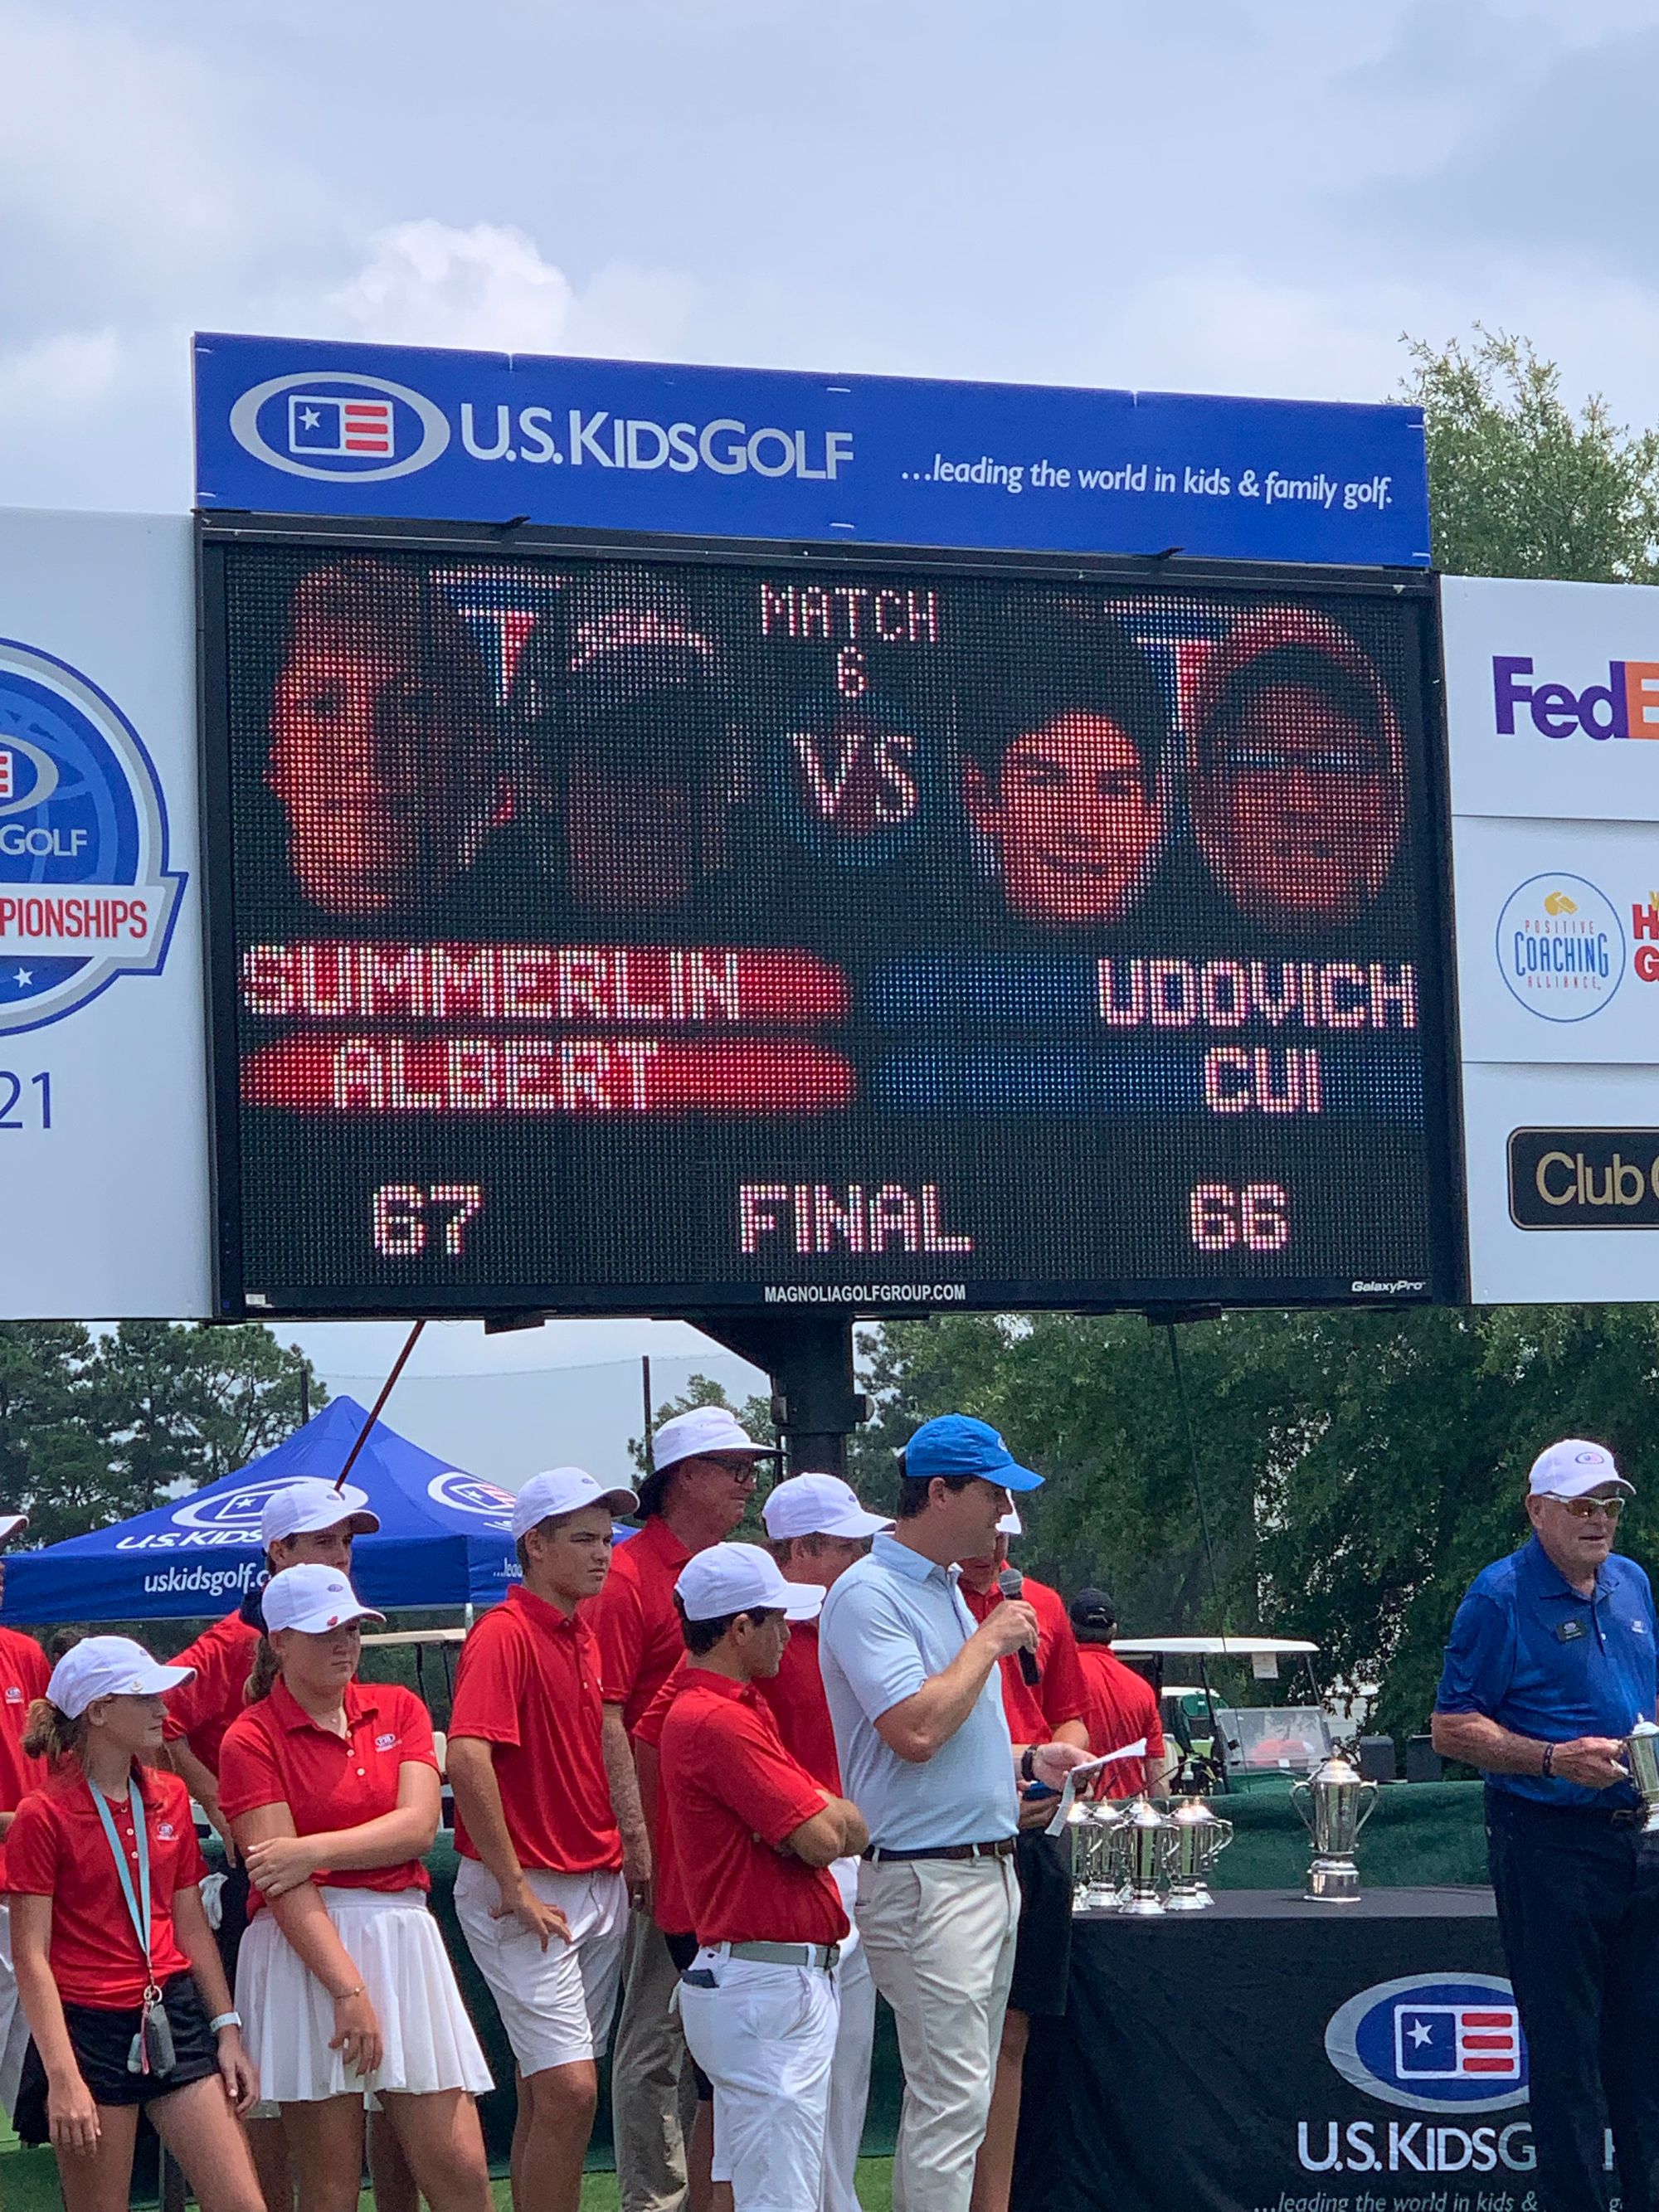 Minnesota's Sam Udovich Commits to Division I TCU and Secures Victory in First AJGA Tournament!